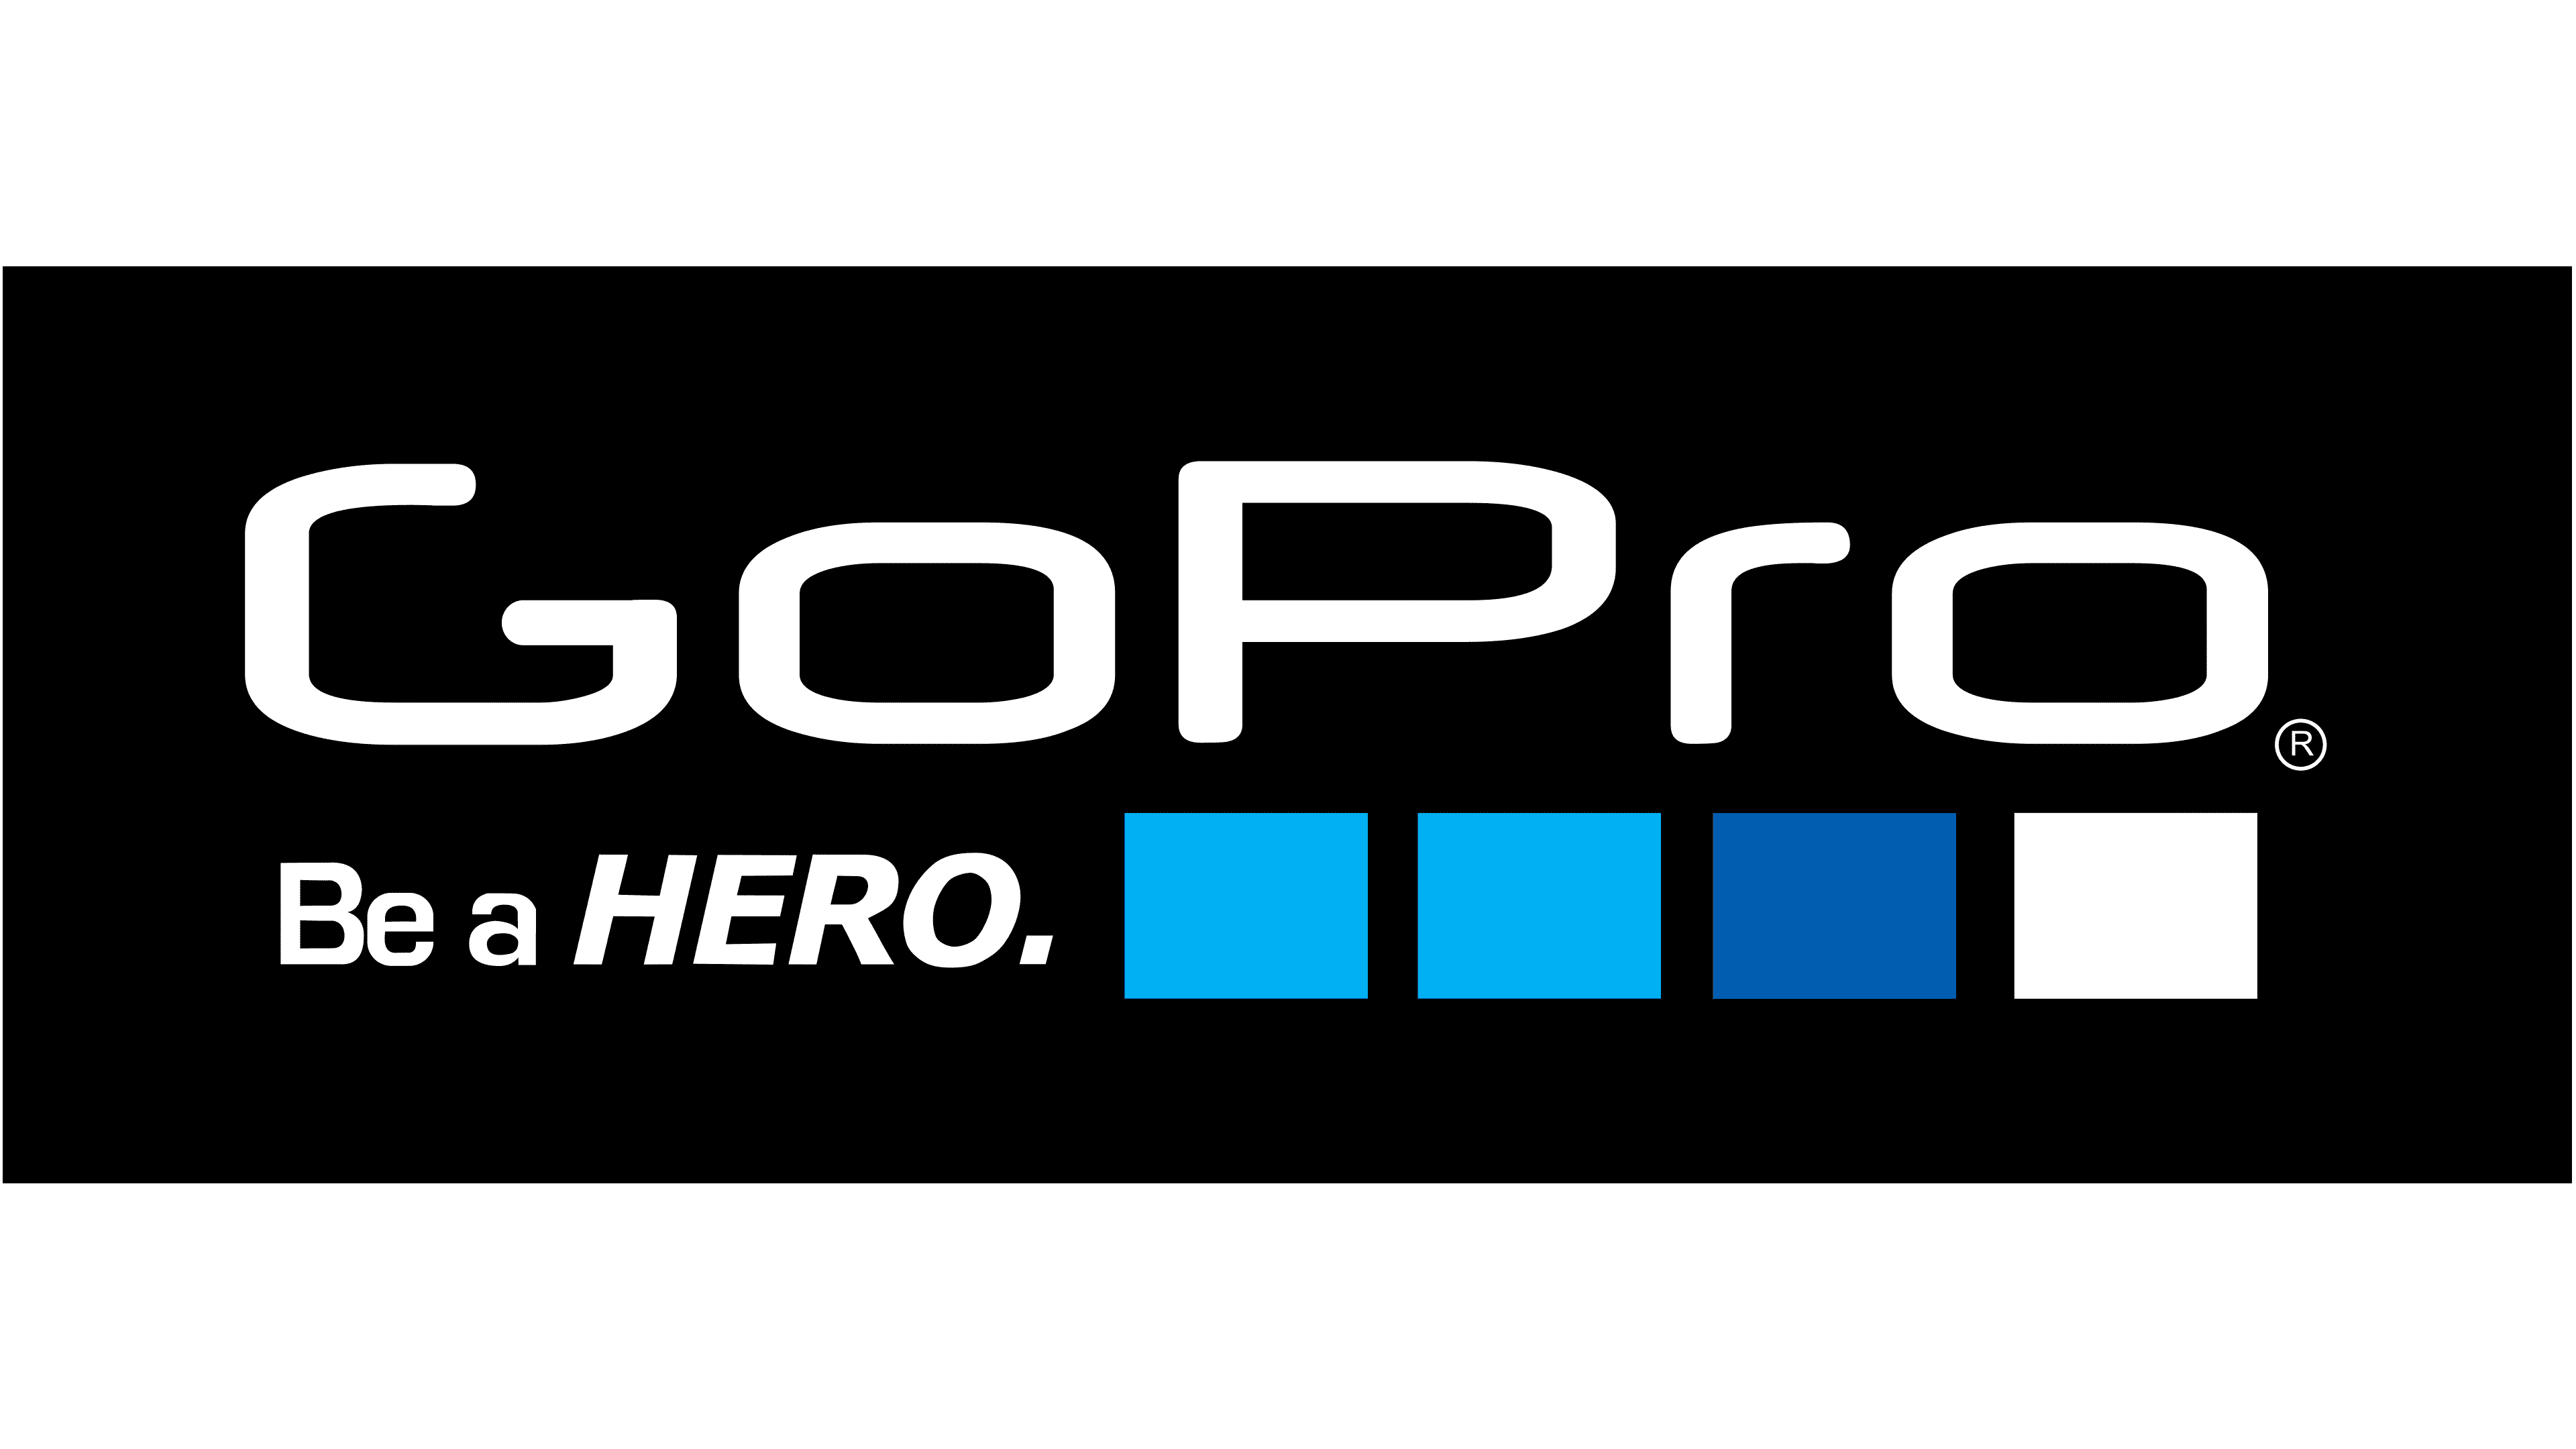 Gopro Logo The Most Famous Brands And Company Logos In The World